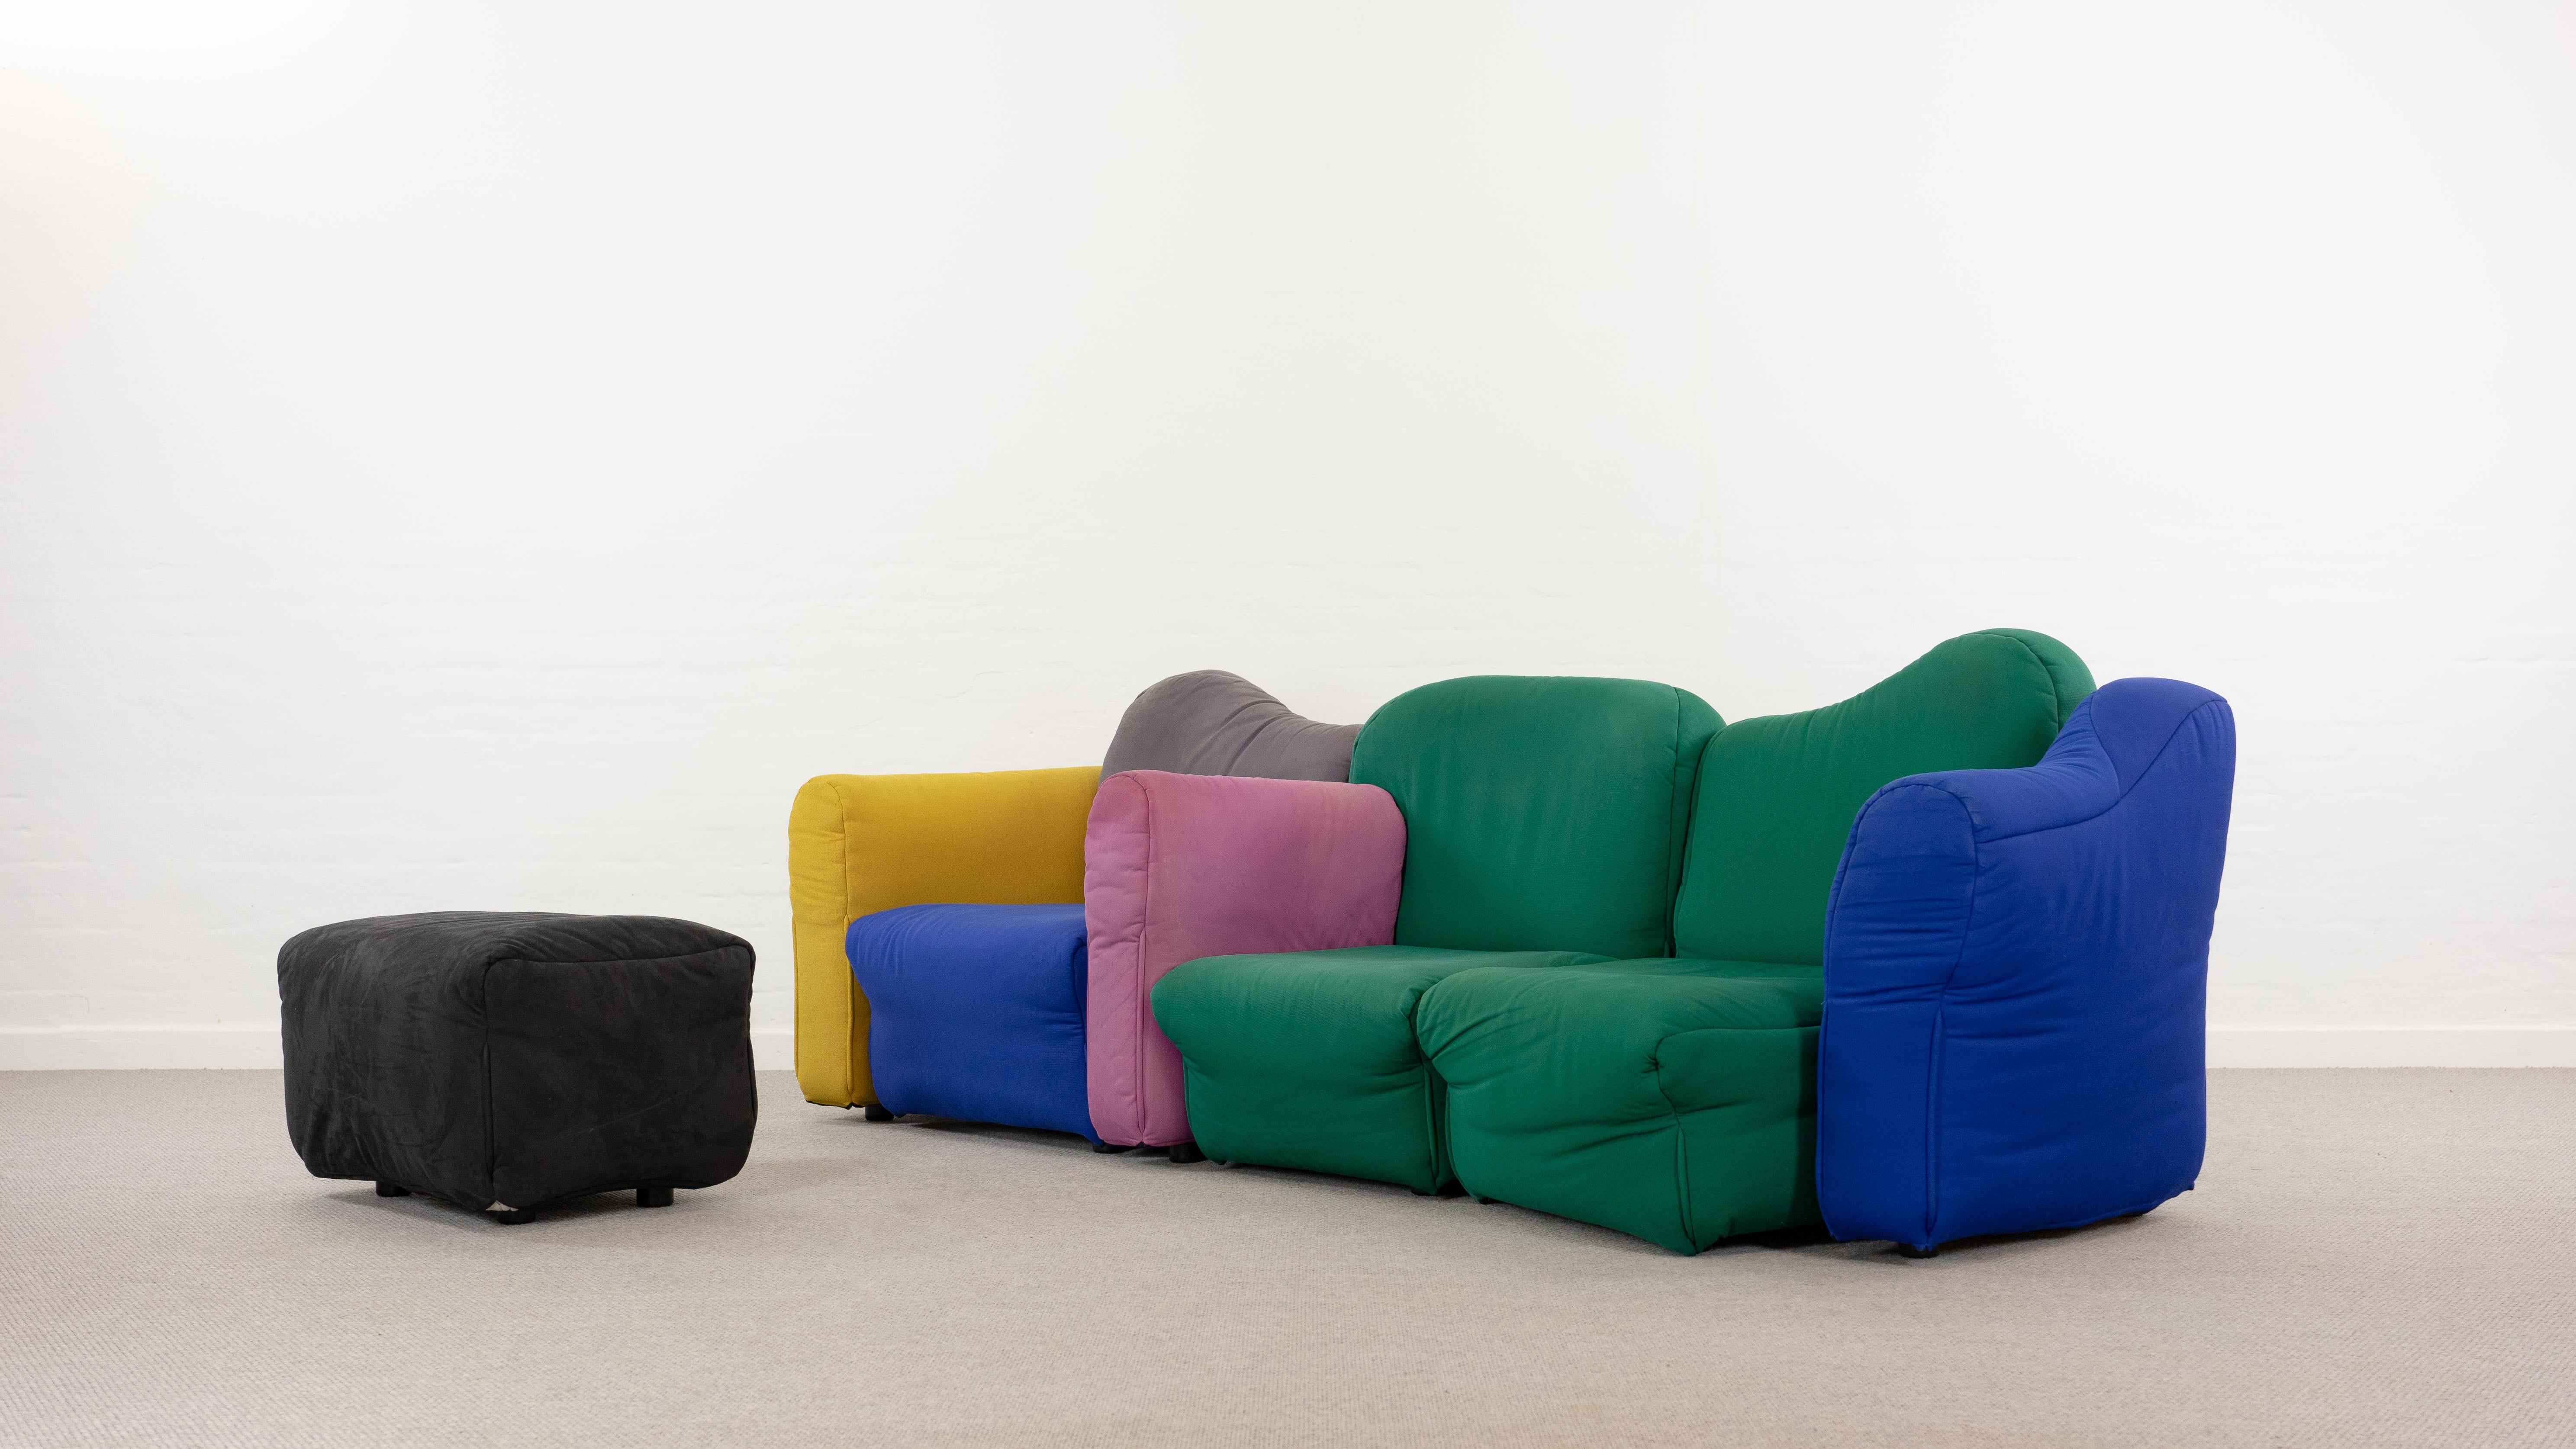 Post-Modern Cannaregio Modular Sofa with Footrest by Gaetano Pesce for Cassina, Italy 1986 For Sale